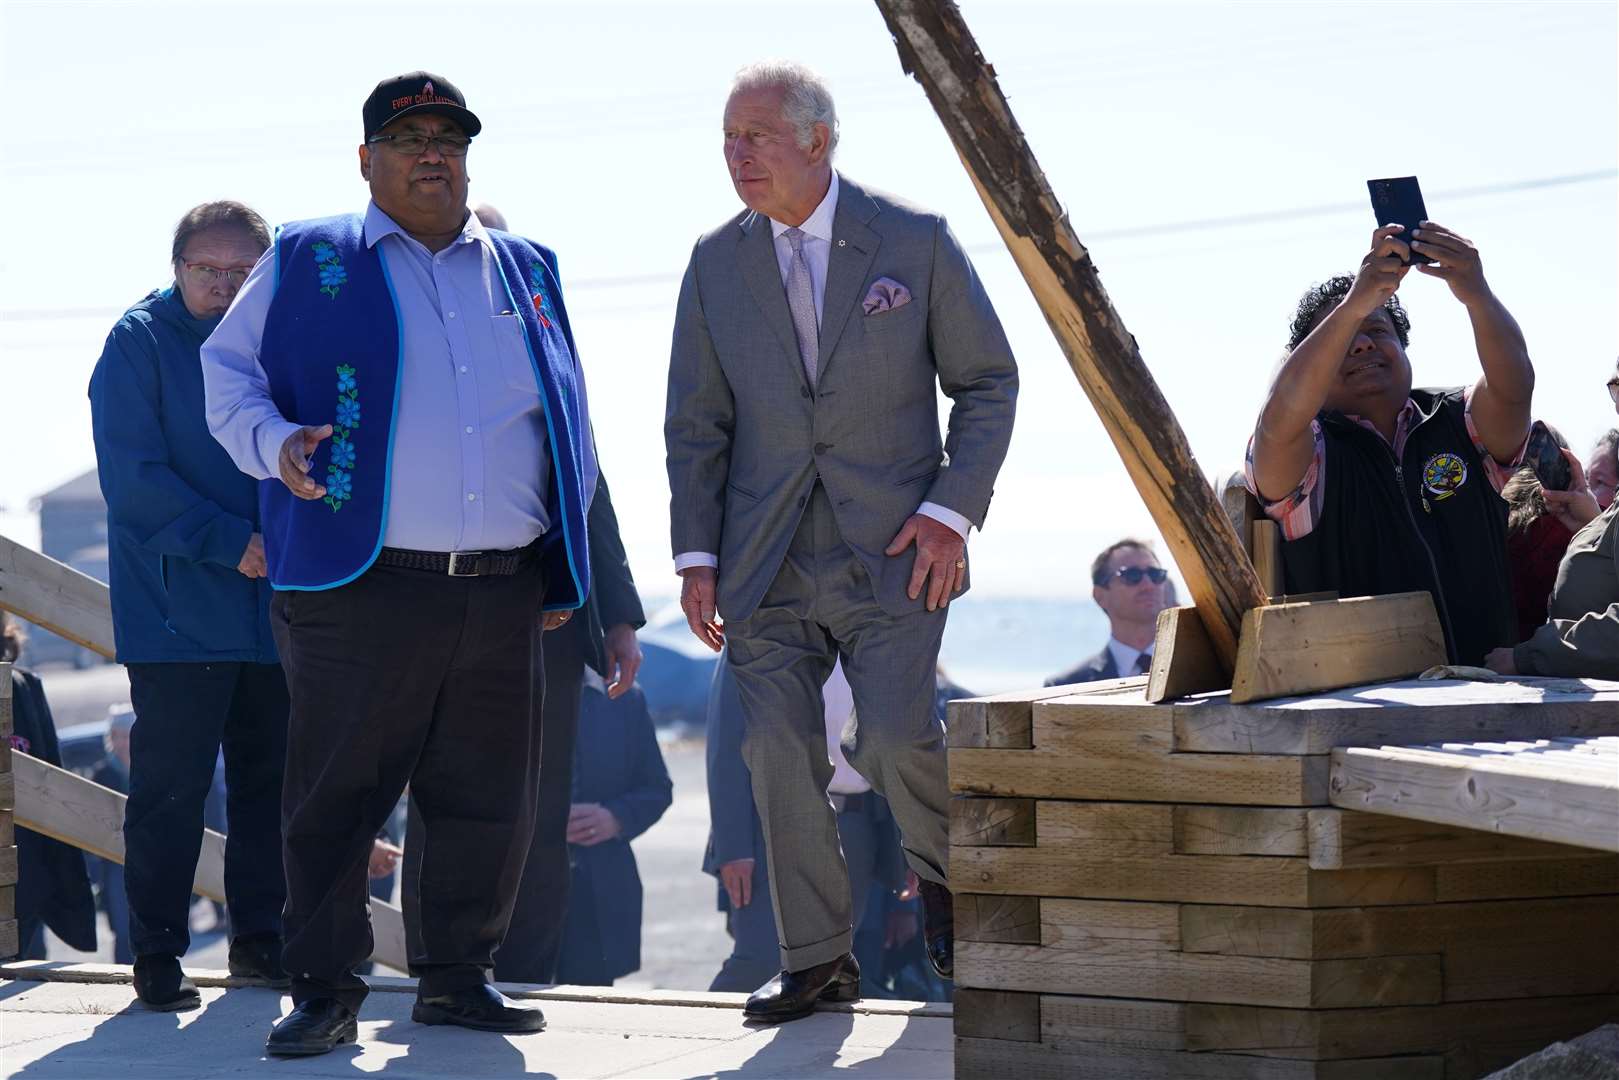 The Prince of Wales arrives for a visit to the Dettah community, in Yellowknife, during a three-day trip to Canada with the Duchess of Cornwall to mark the Queen’s Platinum Jubilee (Jacob King/PA)